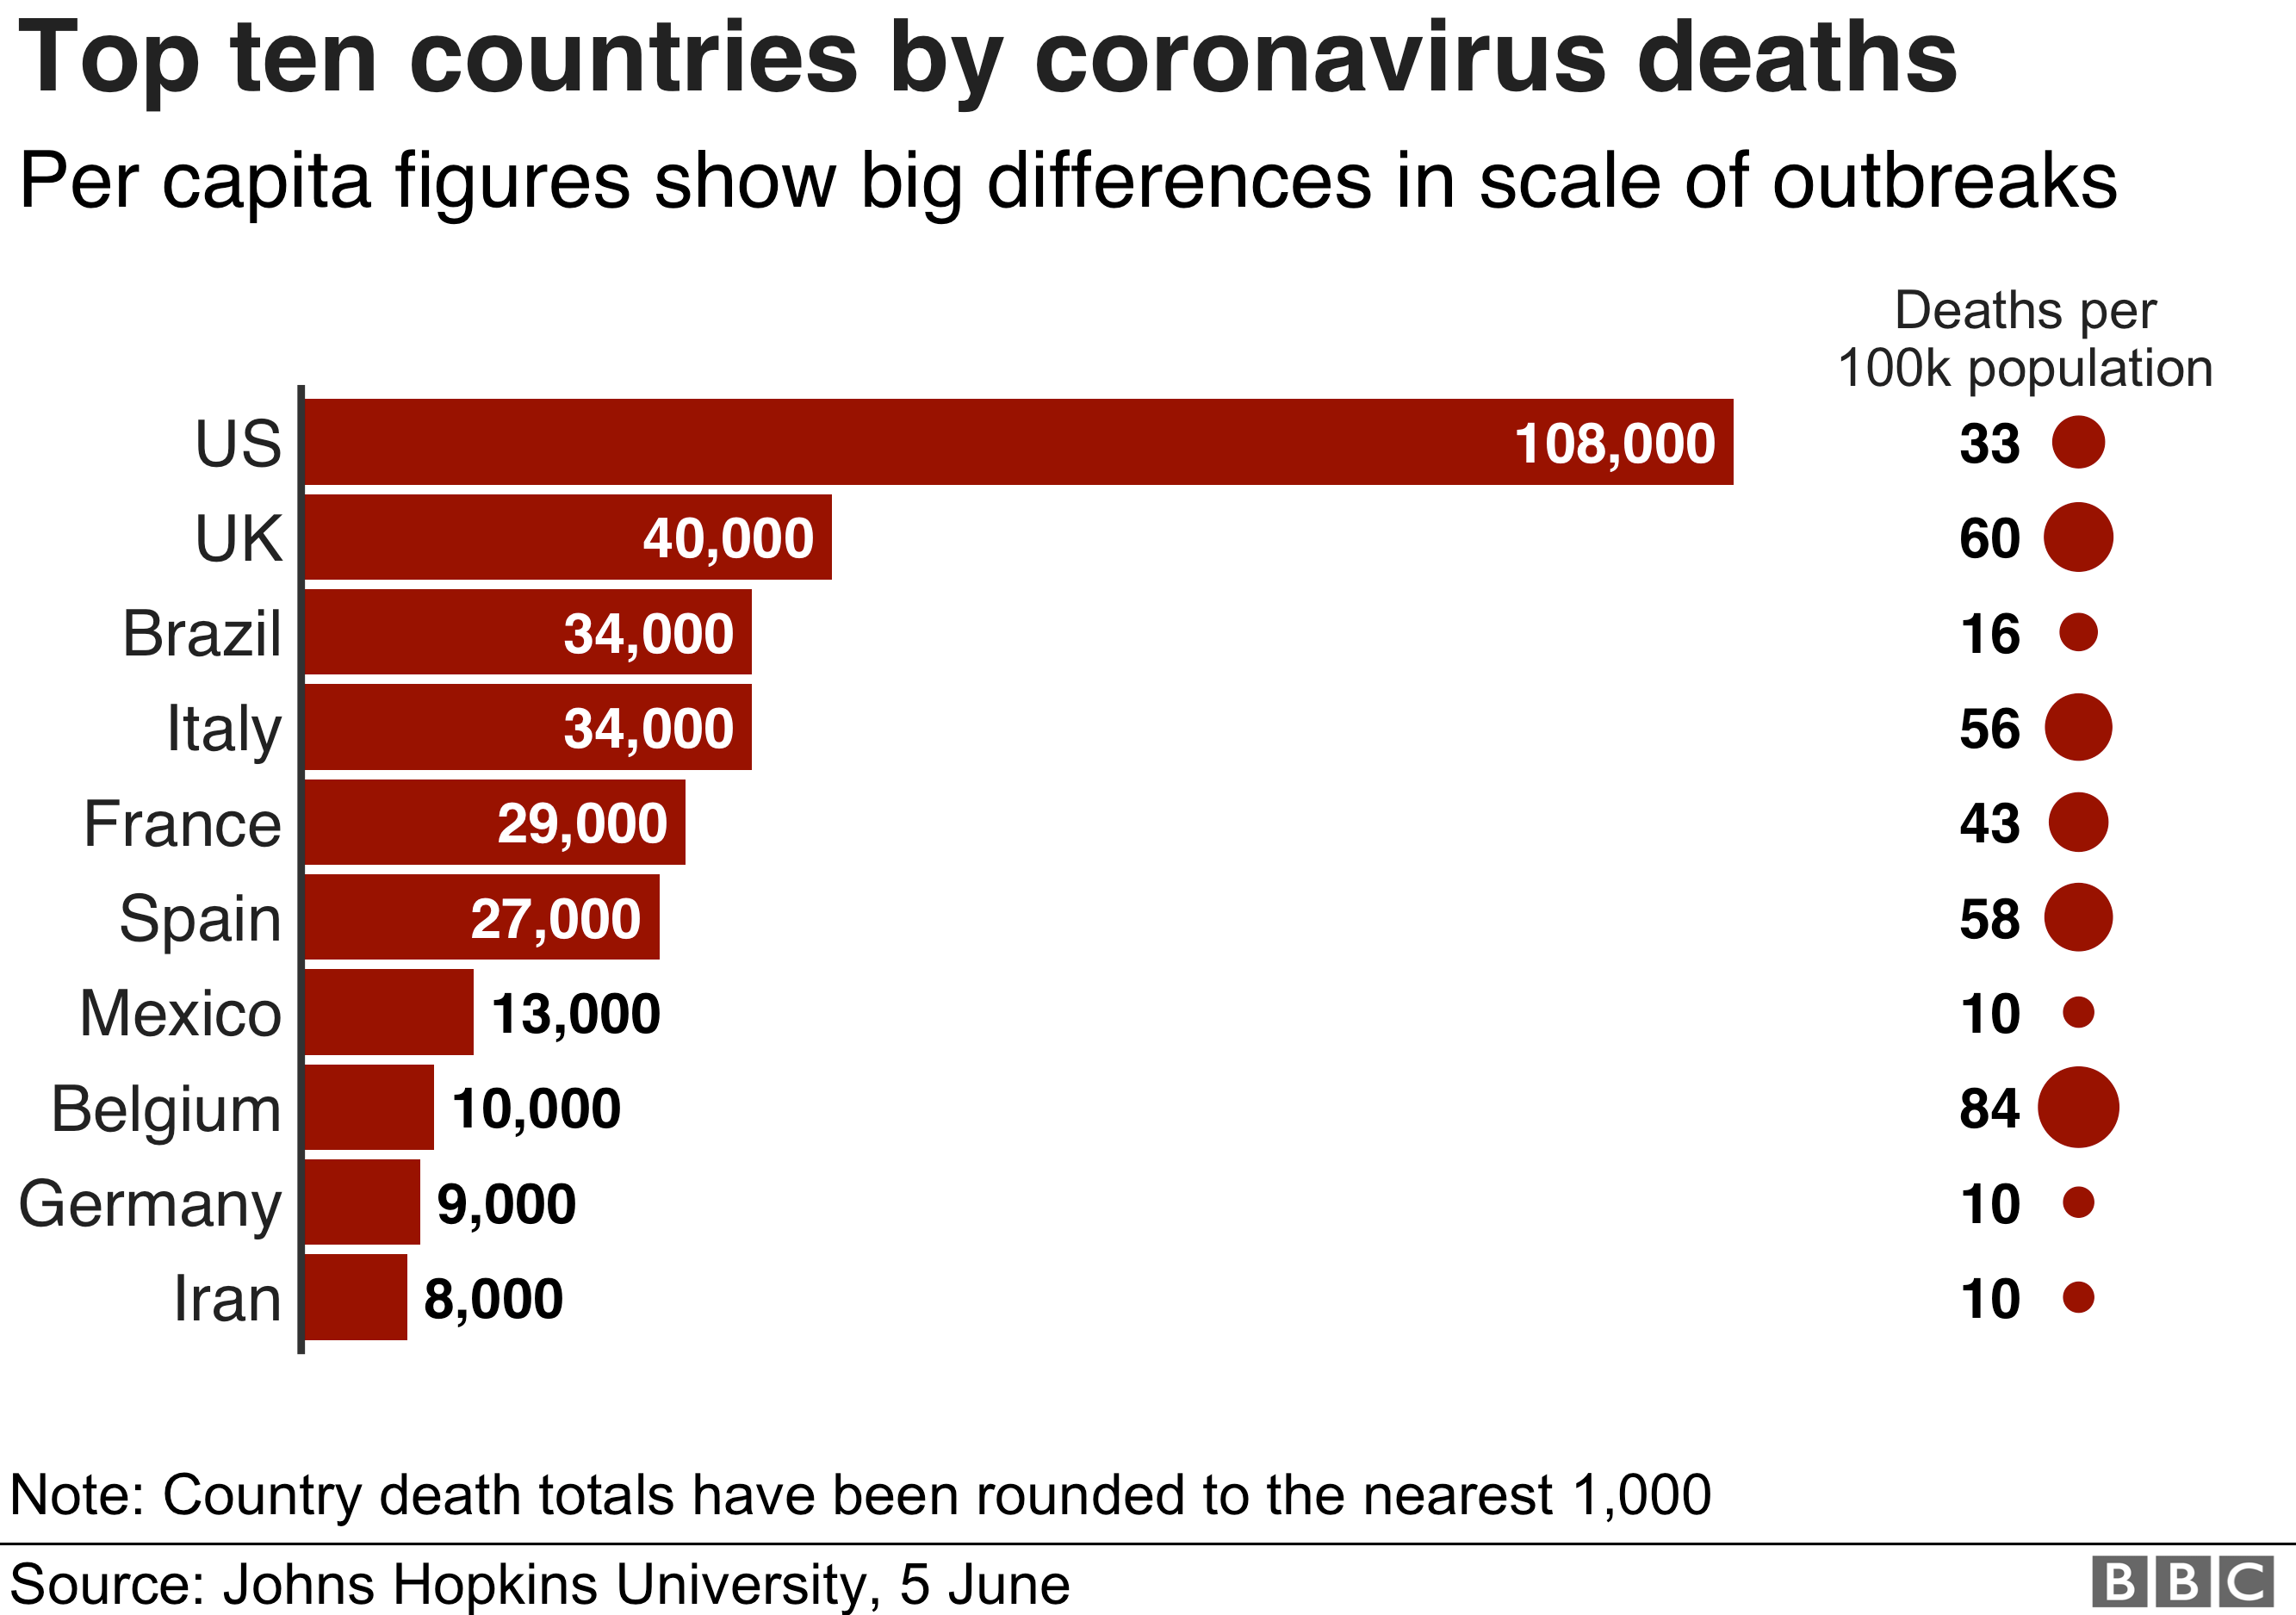 Chart showing the top ten countries by coronavirus deaths and the number of deaths per 100k population for each country